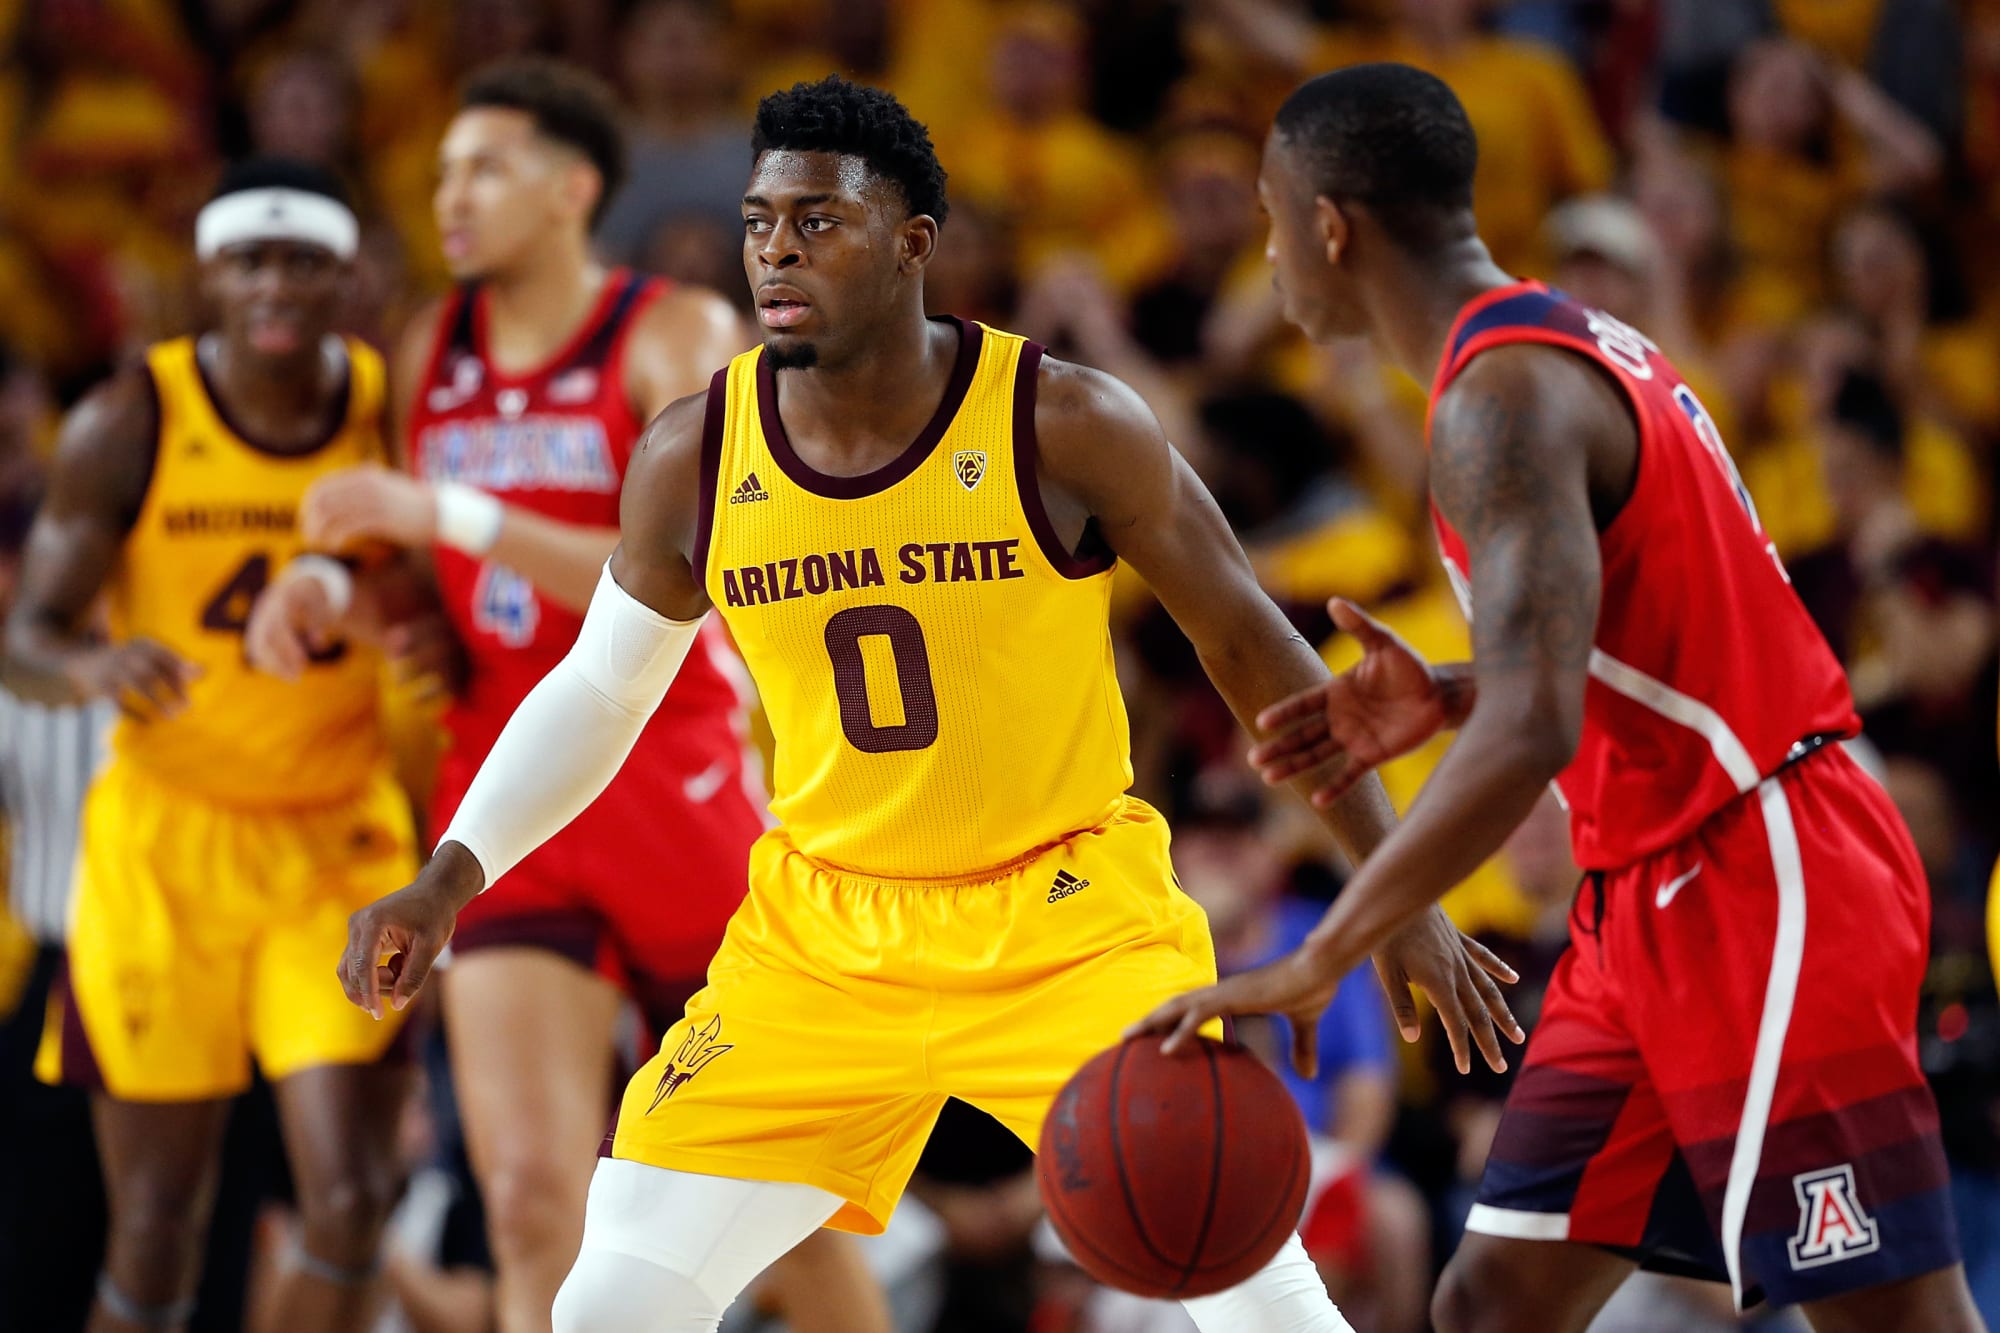 How Canadian Luguentz Dort Went From Undrafted In 2019 To One Of